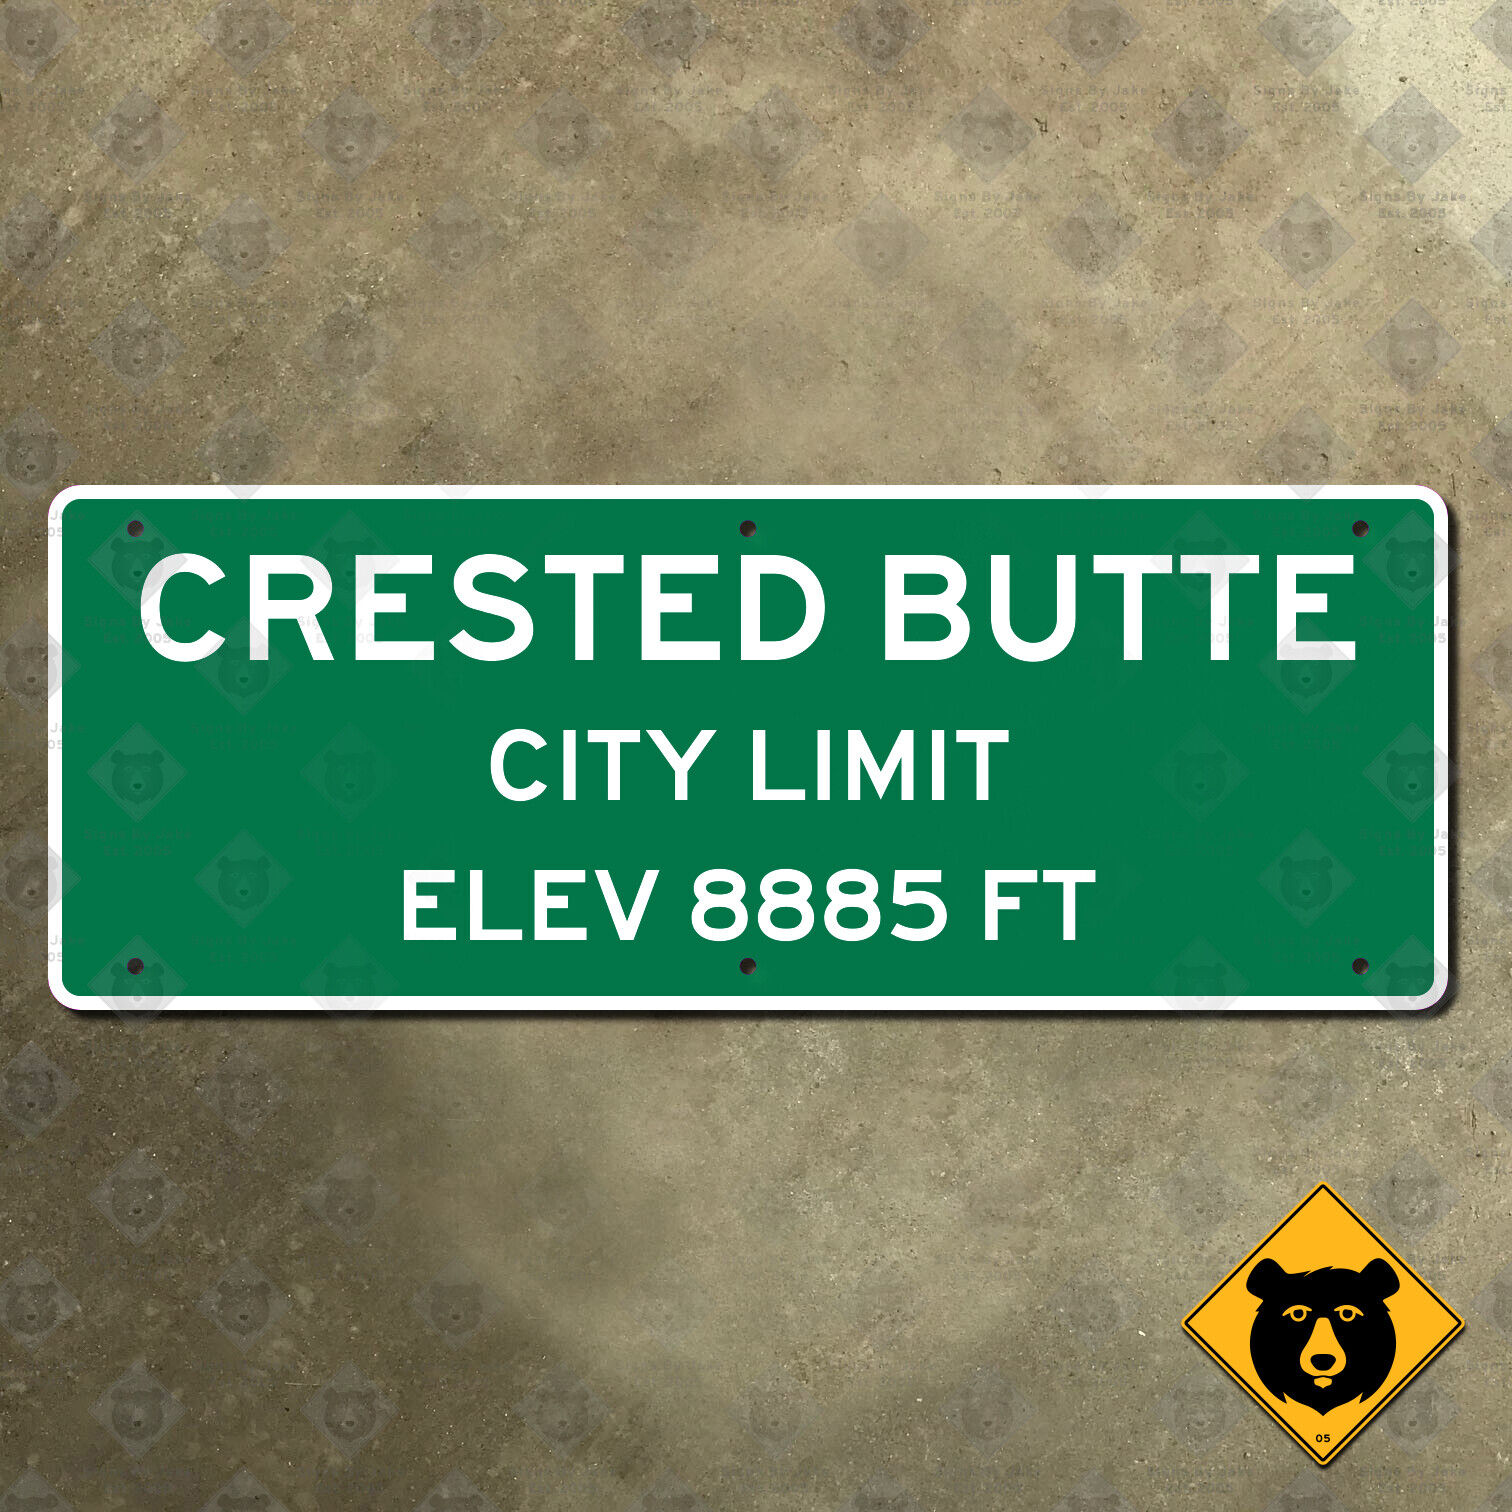 Crested Butte Colorado city town limit boundary road highway sign elevation 20x7